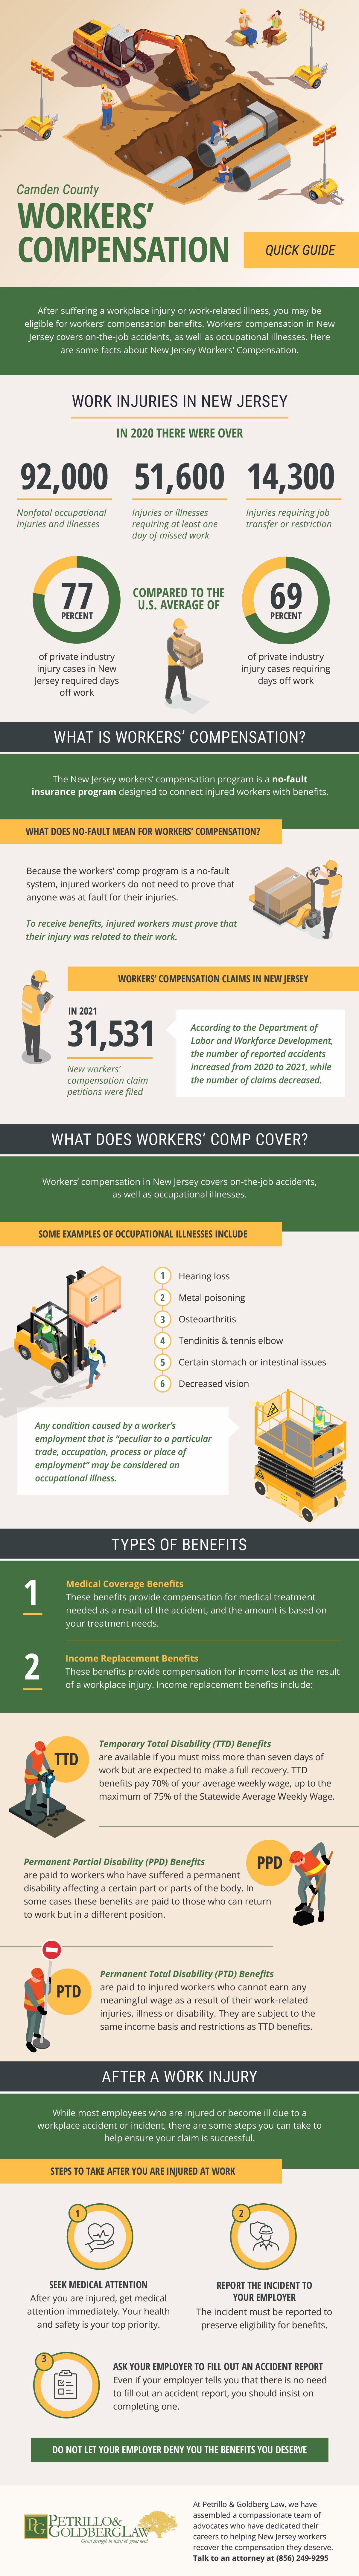 After suffering a workplace injury or work-related illness, you may be eligible for workers' compensation benefits.